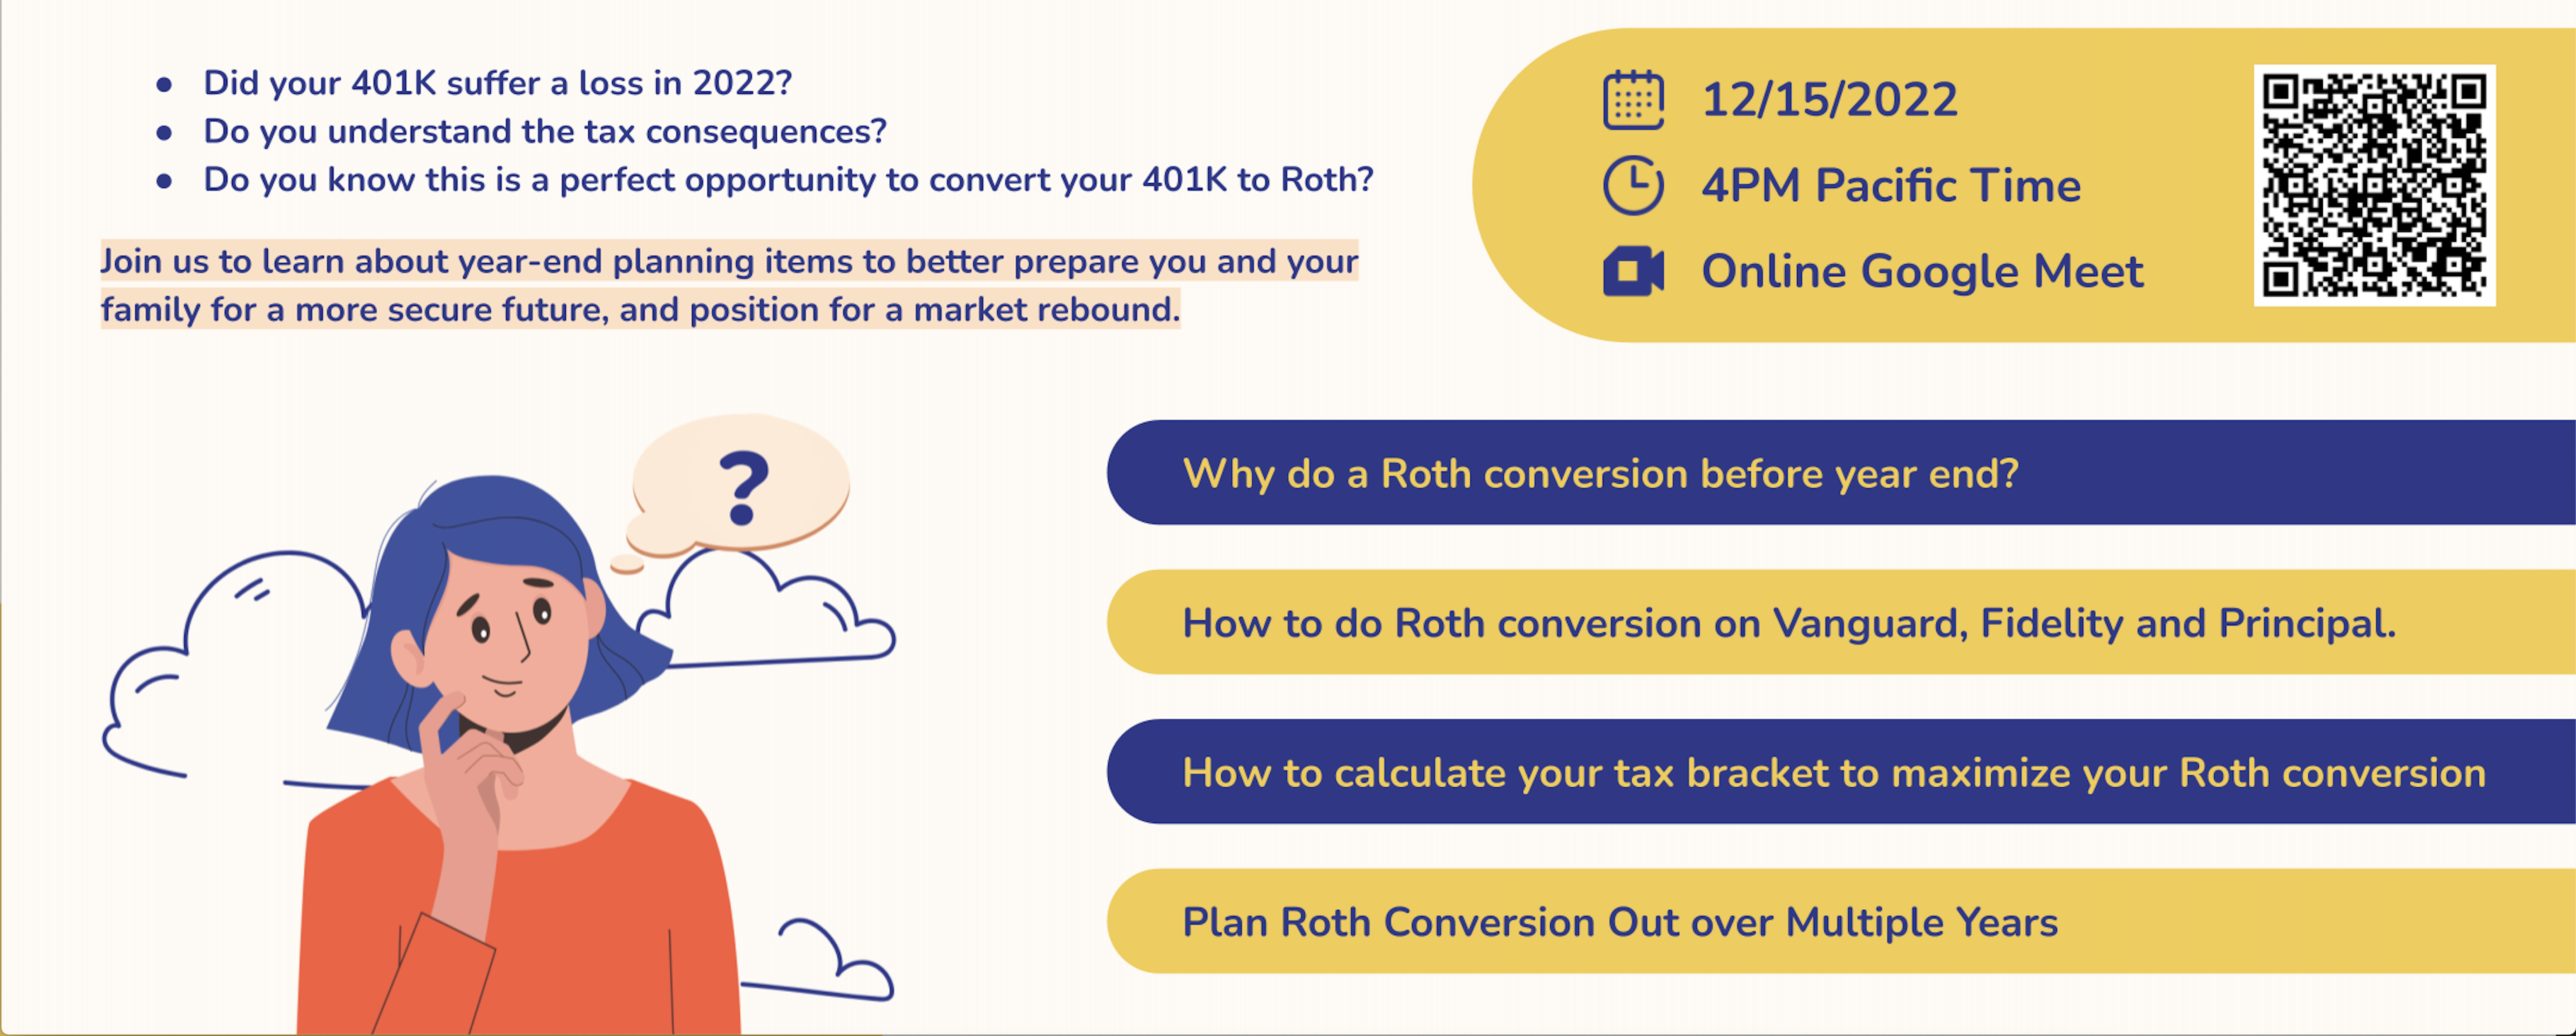 Seminar - Step-by-step Guide on Roth 401K Conversion Before Year End